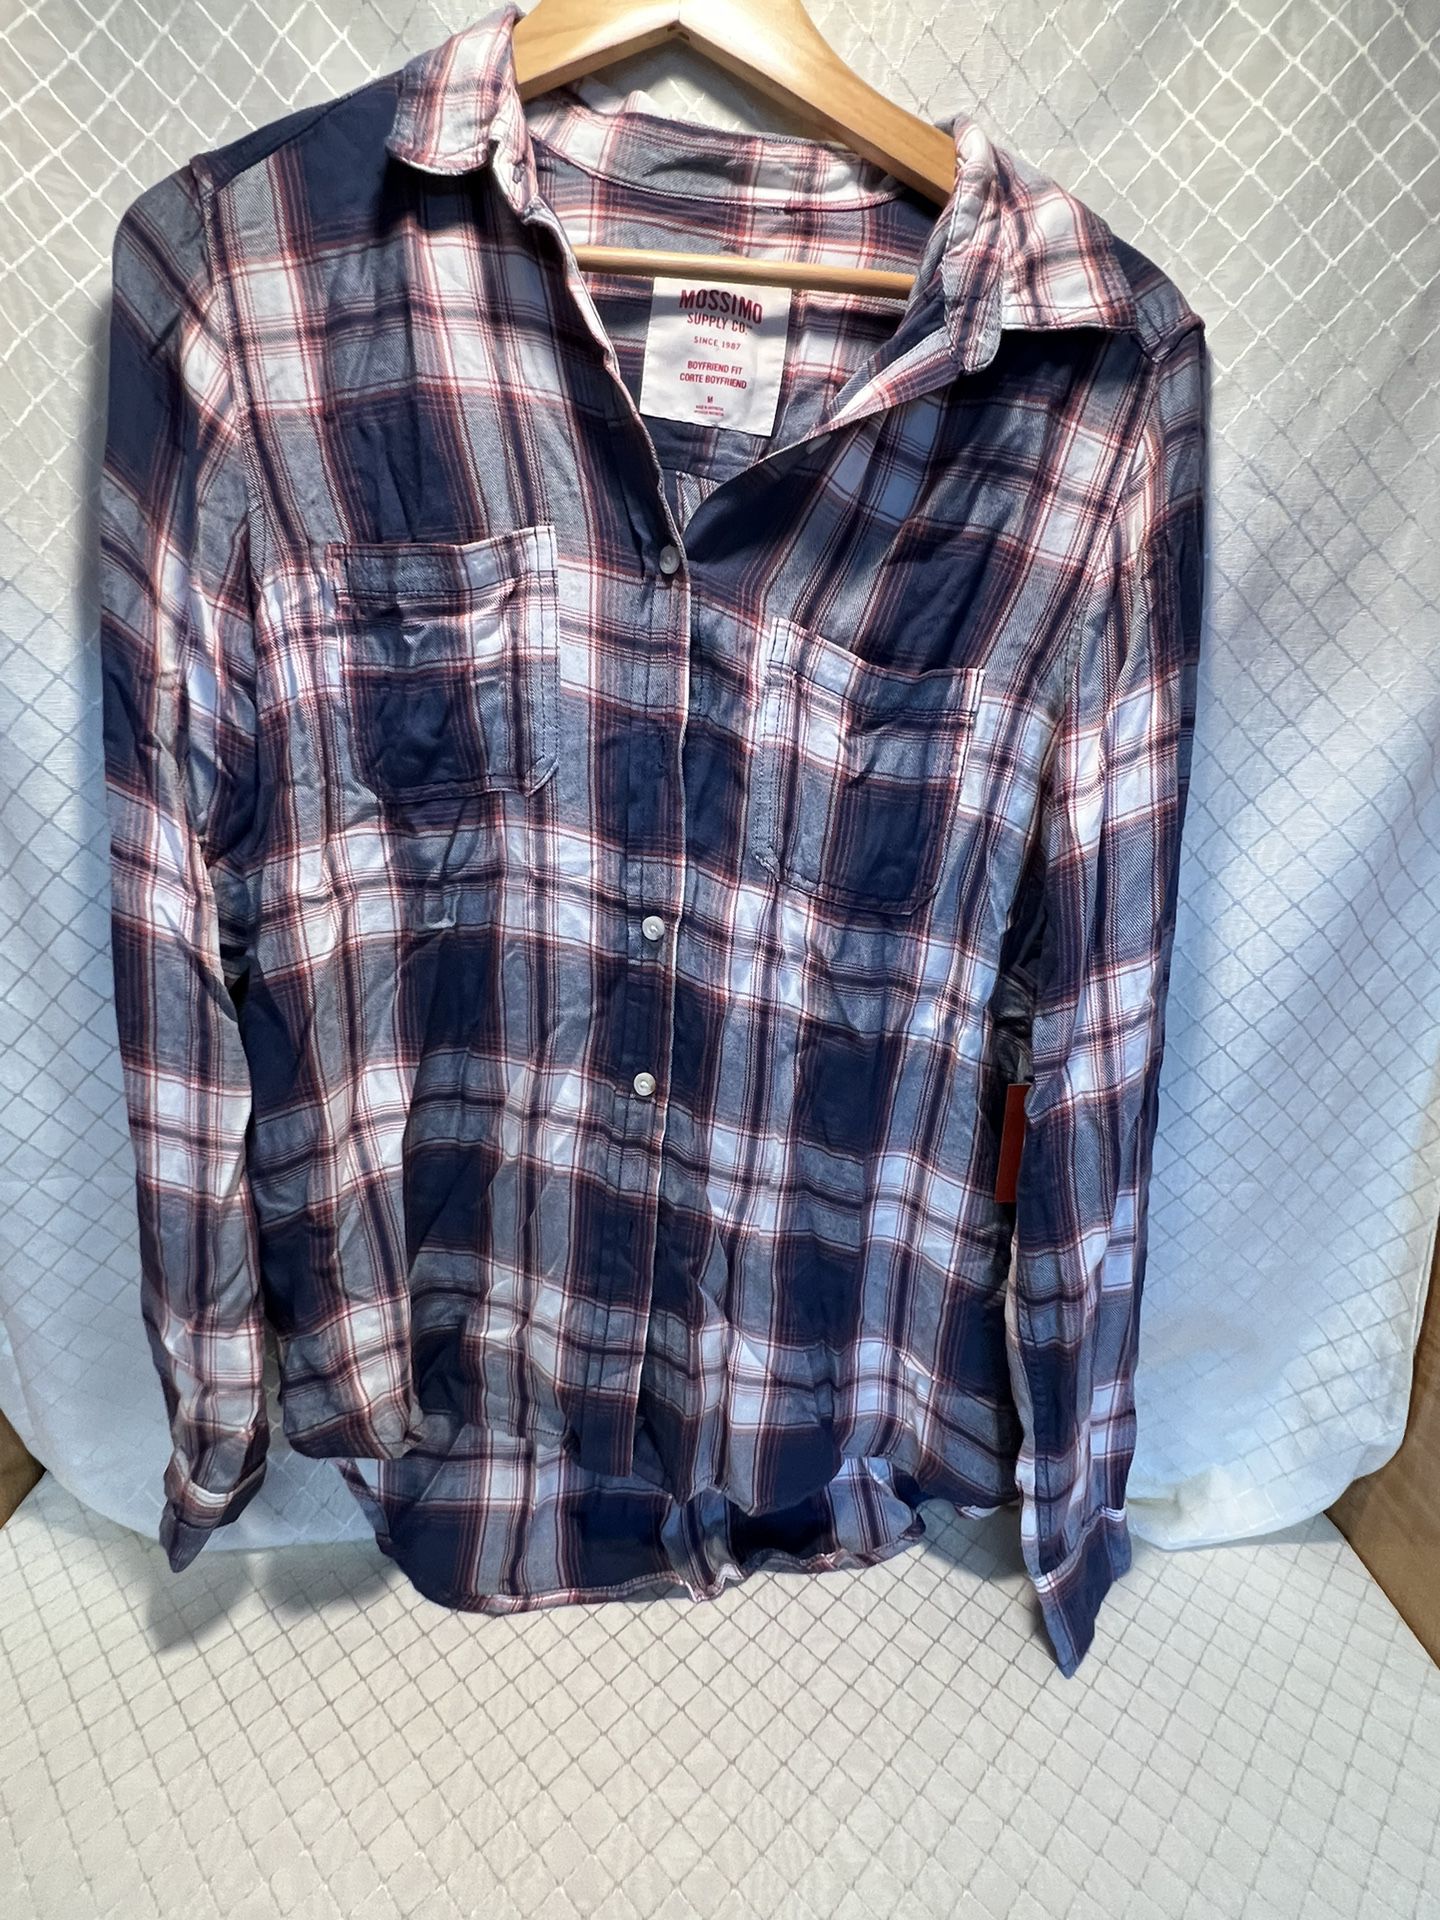 MOSSIMO Womens SIZE M Blue Plaid Shirt Boyfriend Fit Casual Collared Long Sleeve